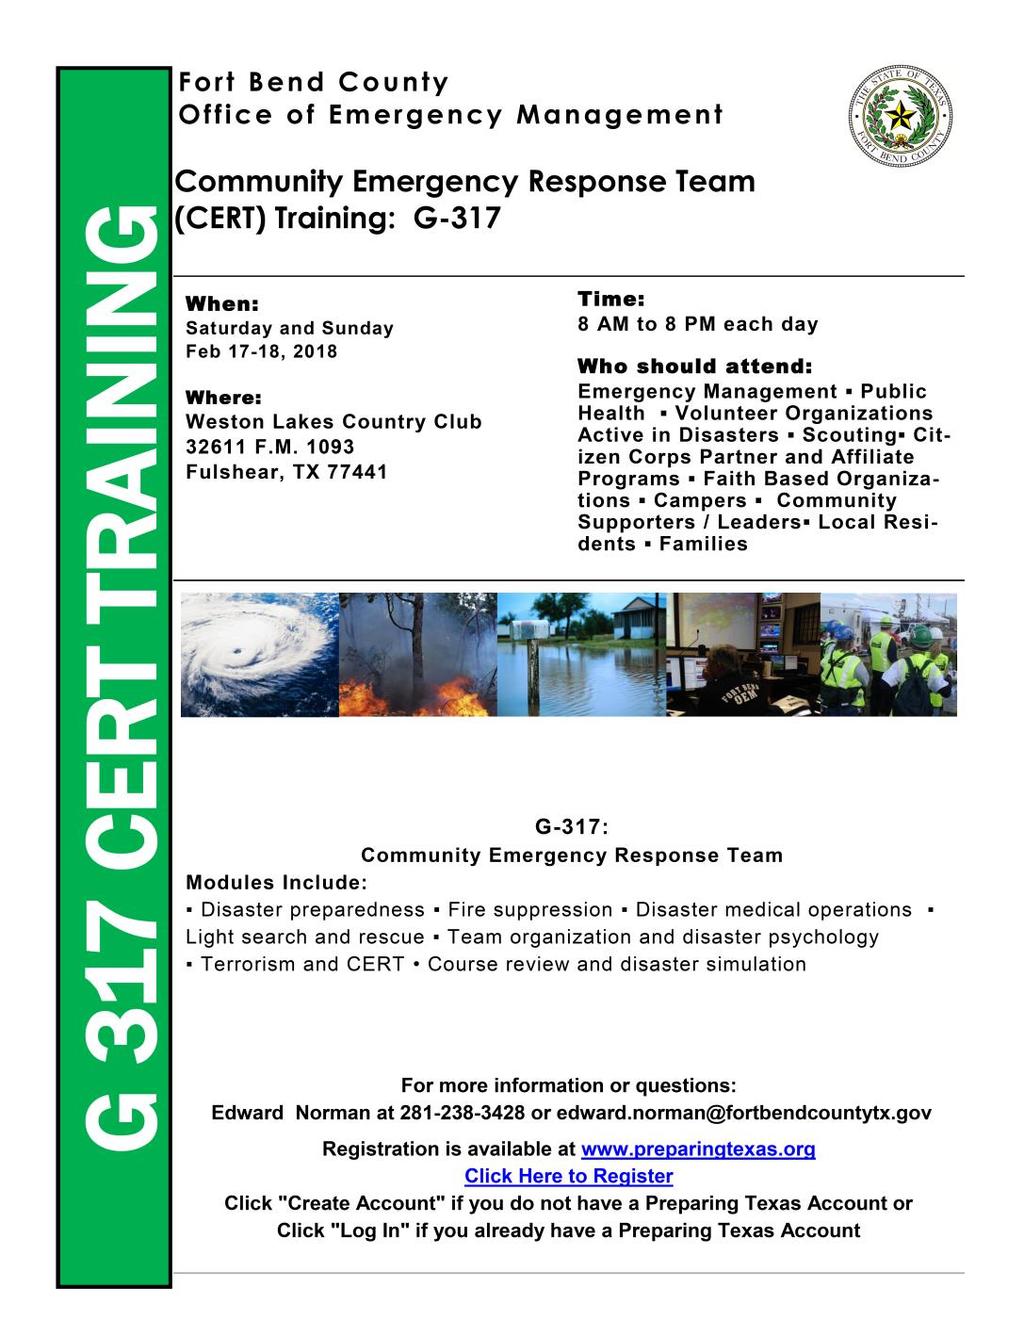 FORT BEND COUNTY EMERGENCY MANAGEMENT COMMUNITY PREPAREDNESS PAGE 2 For more information or questions: Edward Norman at 281-238-3428 or edward.norman@fortbendcountytx.